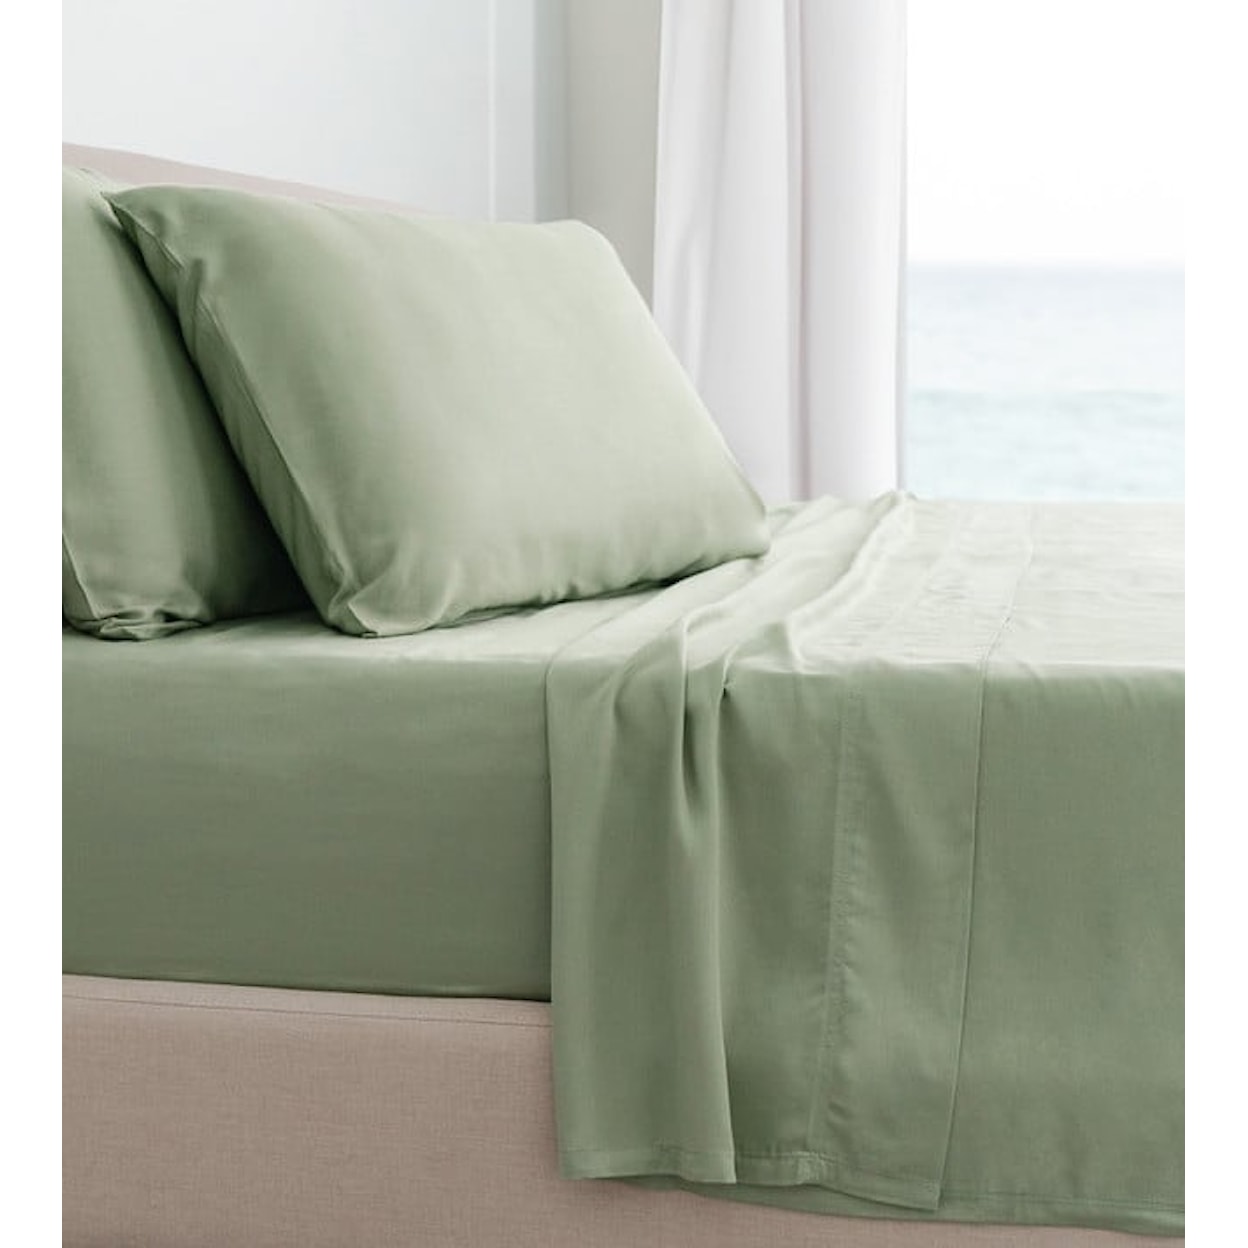 Cariloha Classic Bamboo Bed Sheet Set Queen Classic Bamboo Sheet Set in Sage